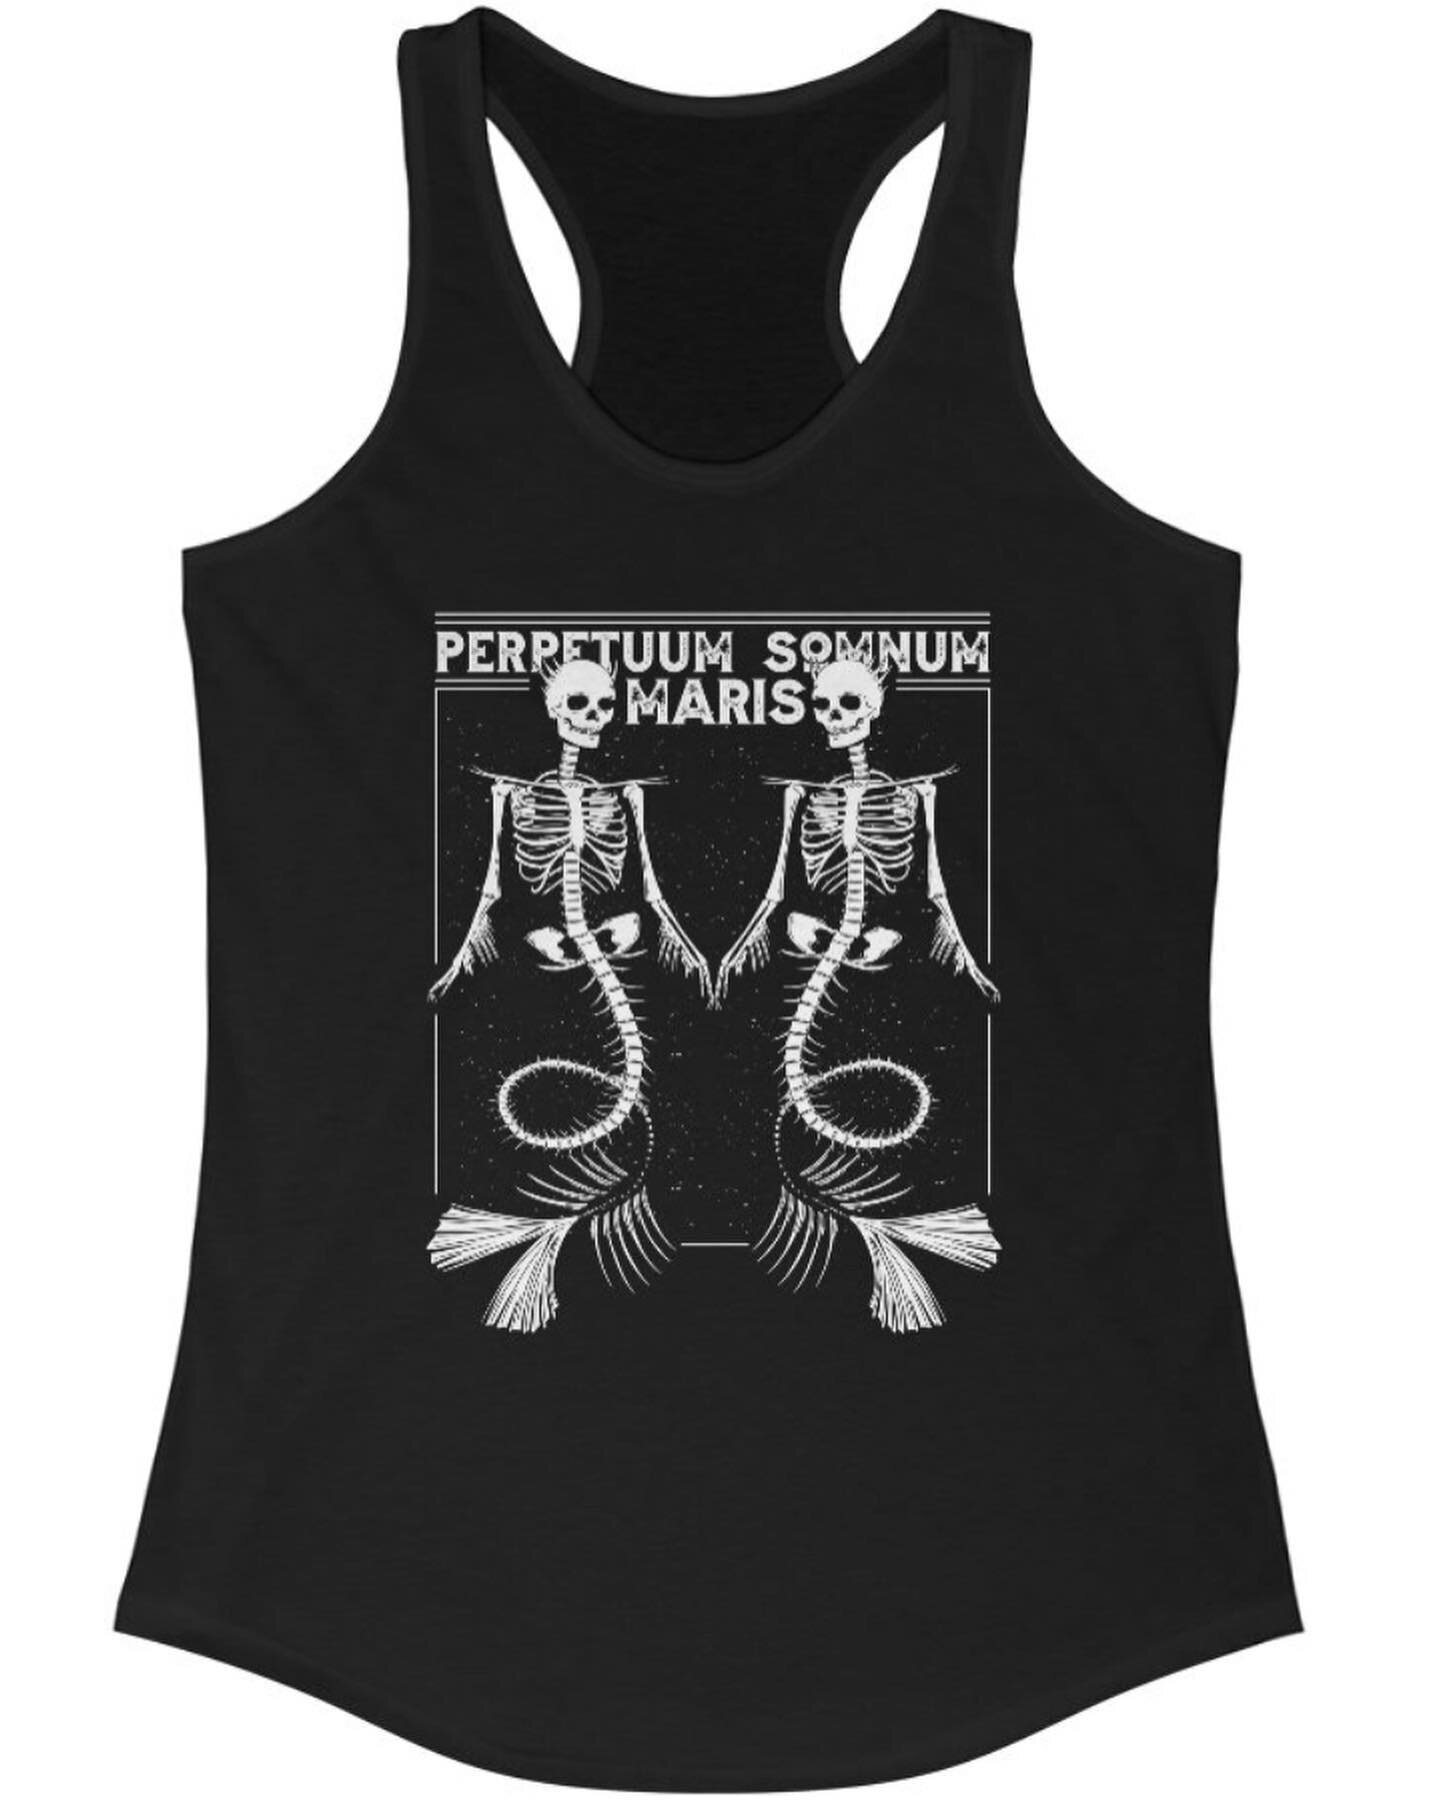 More styles available! Printed on Next Level 1533 racerback tanks. Lightweight &amp; slim fit! 

Use the link in my bio or direct link here 👇🏻

https://www.theficklehare.com/shop/apparel/tanks

#theficklehare #witchywoman #witchywomen #tanktop #twi